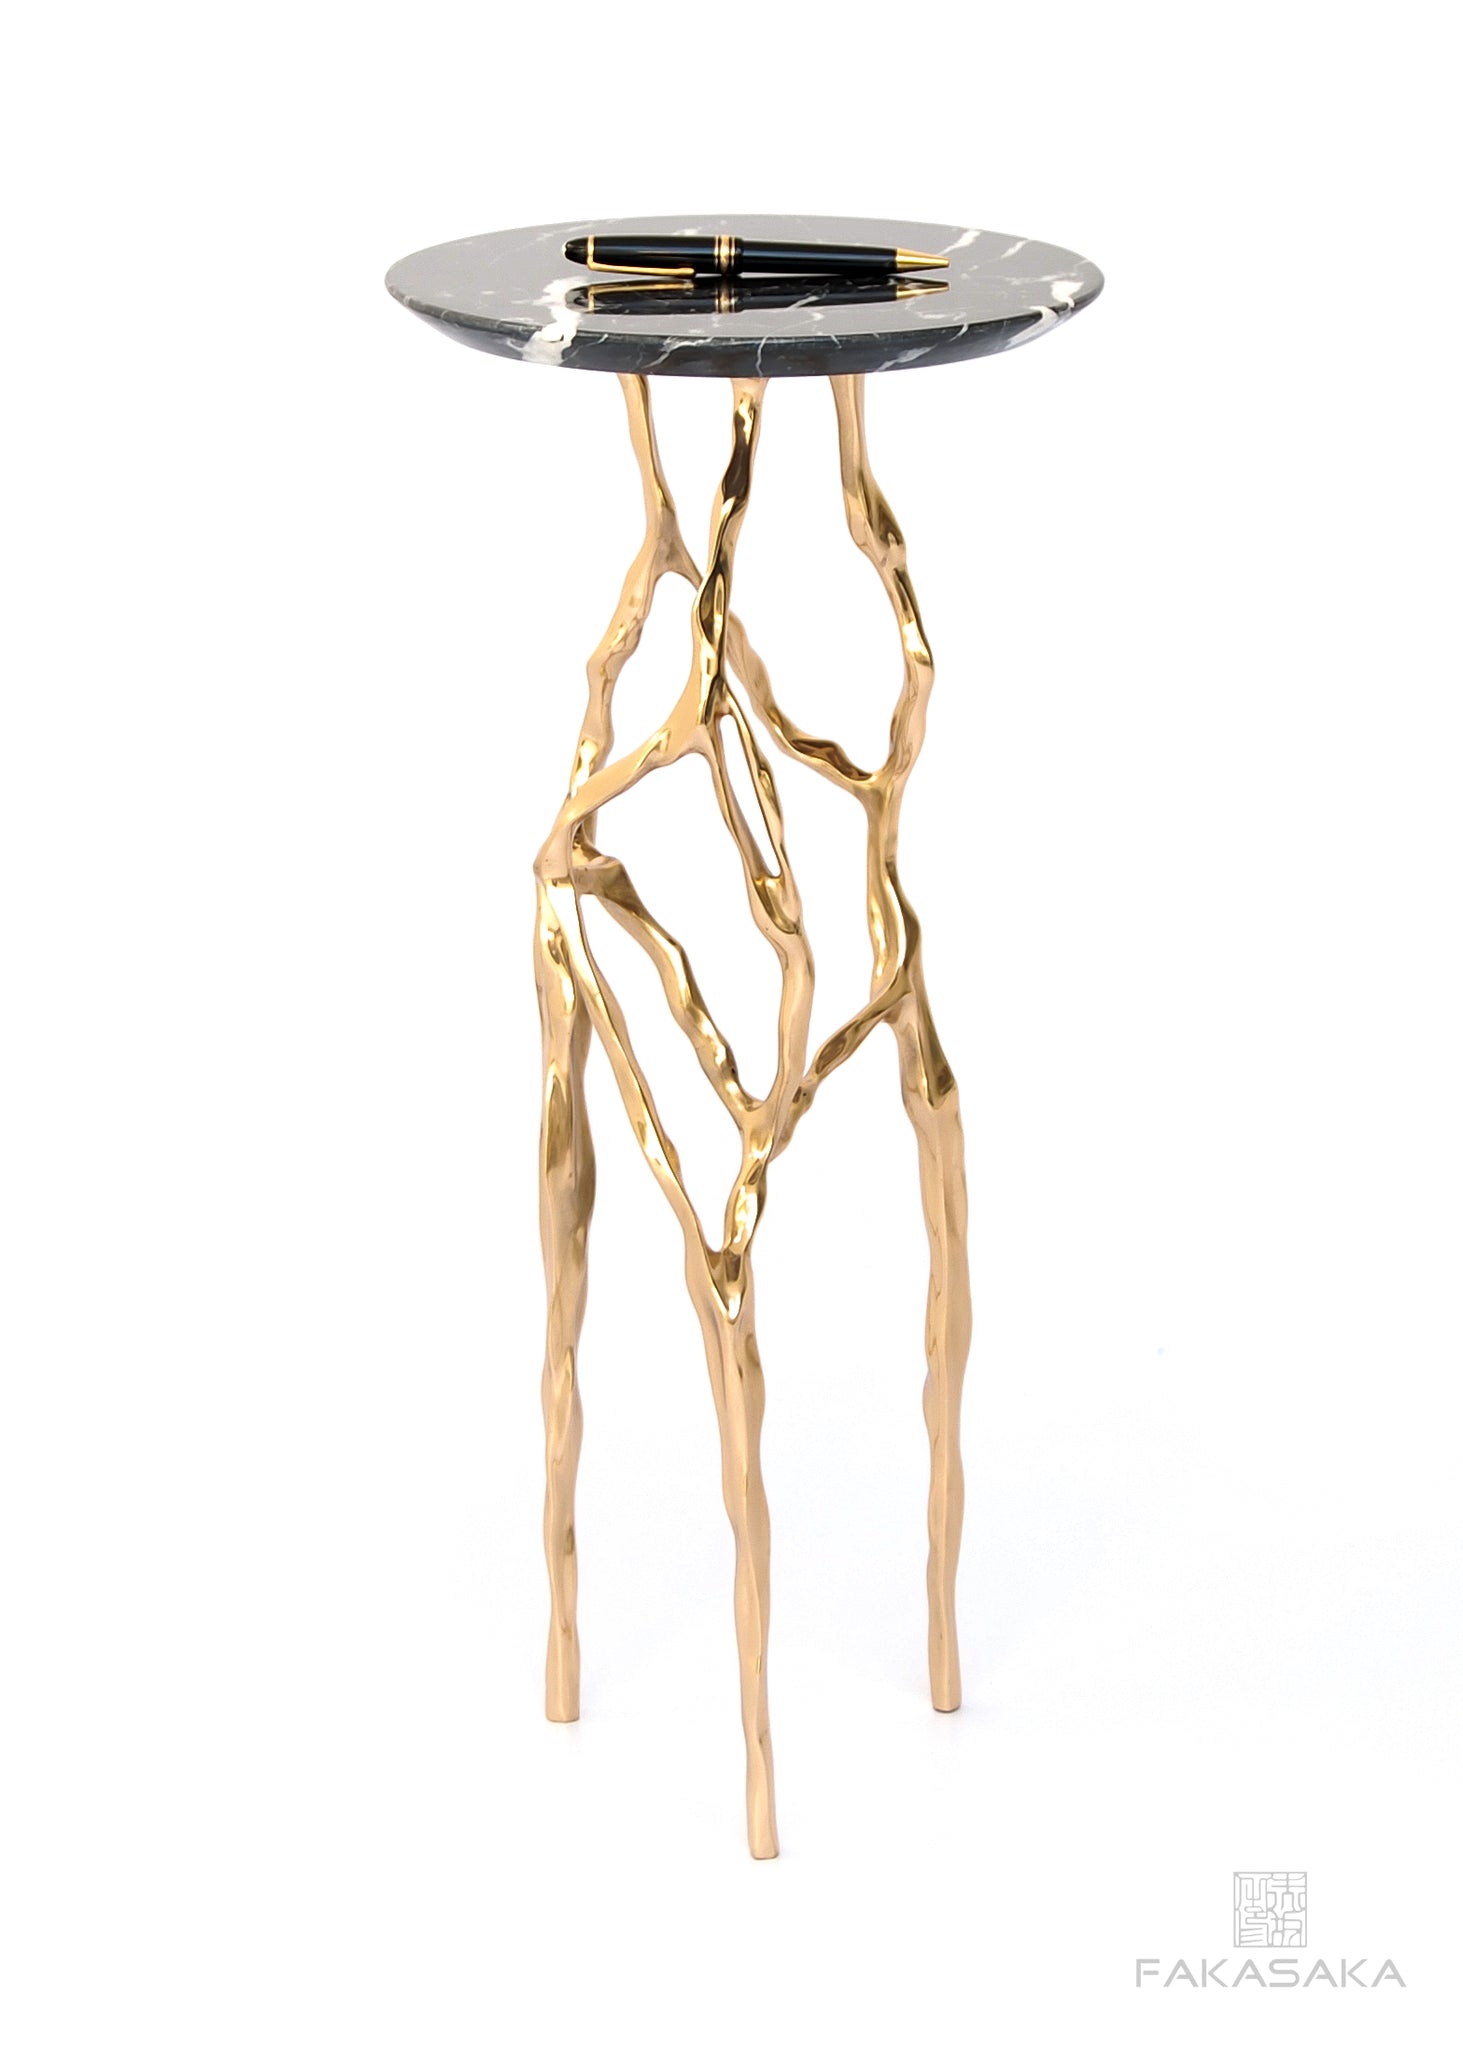 SID DRINK TABLE<br><br>NERO MARQUINA MARBLE<br>POLISHED BRONZE